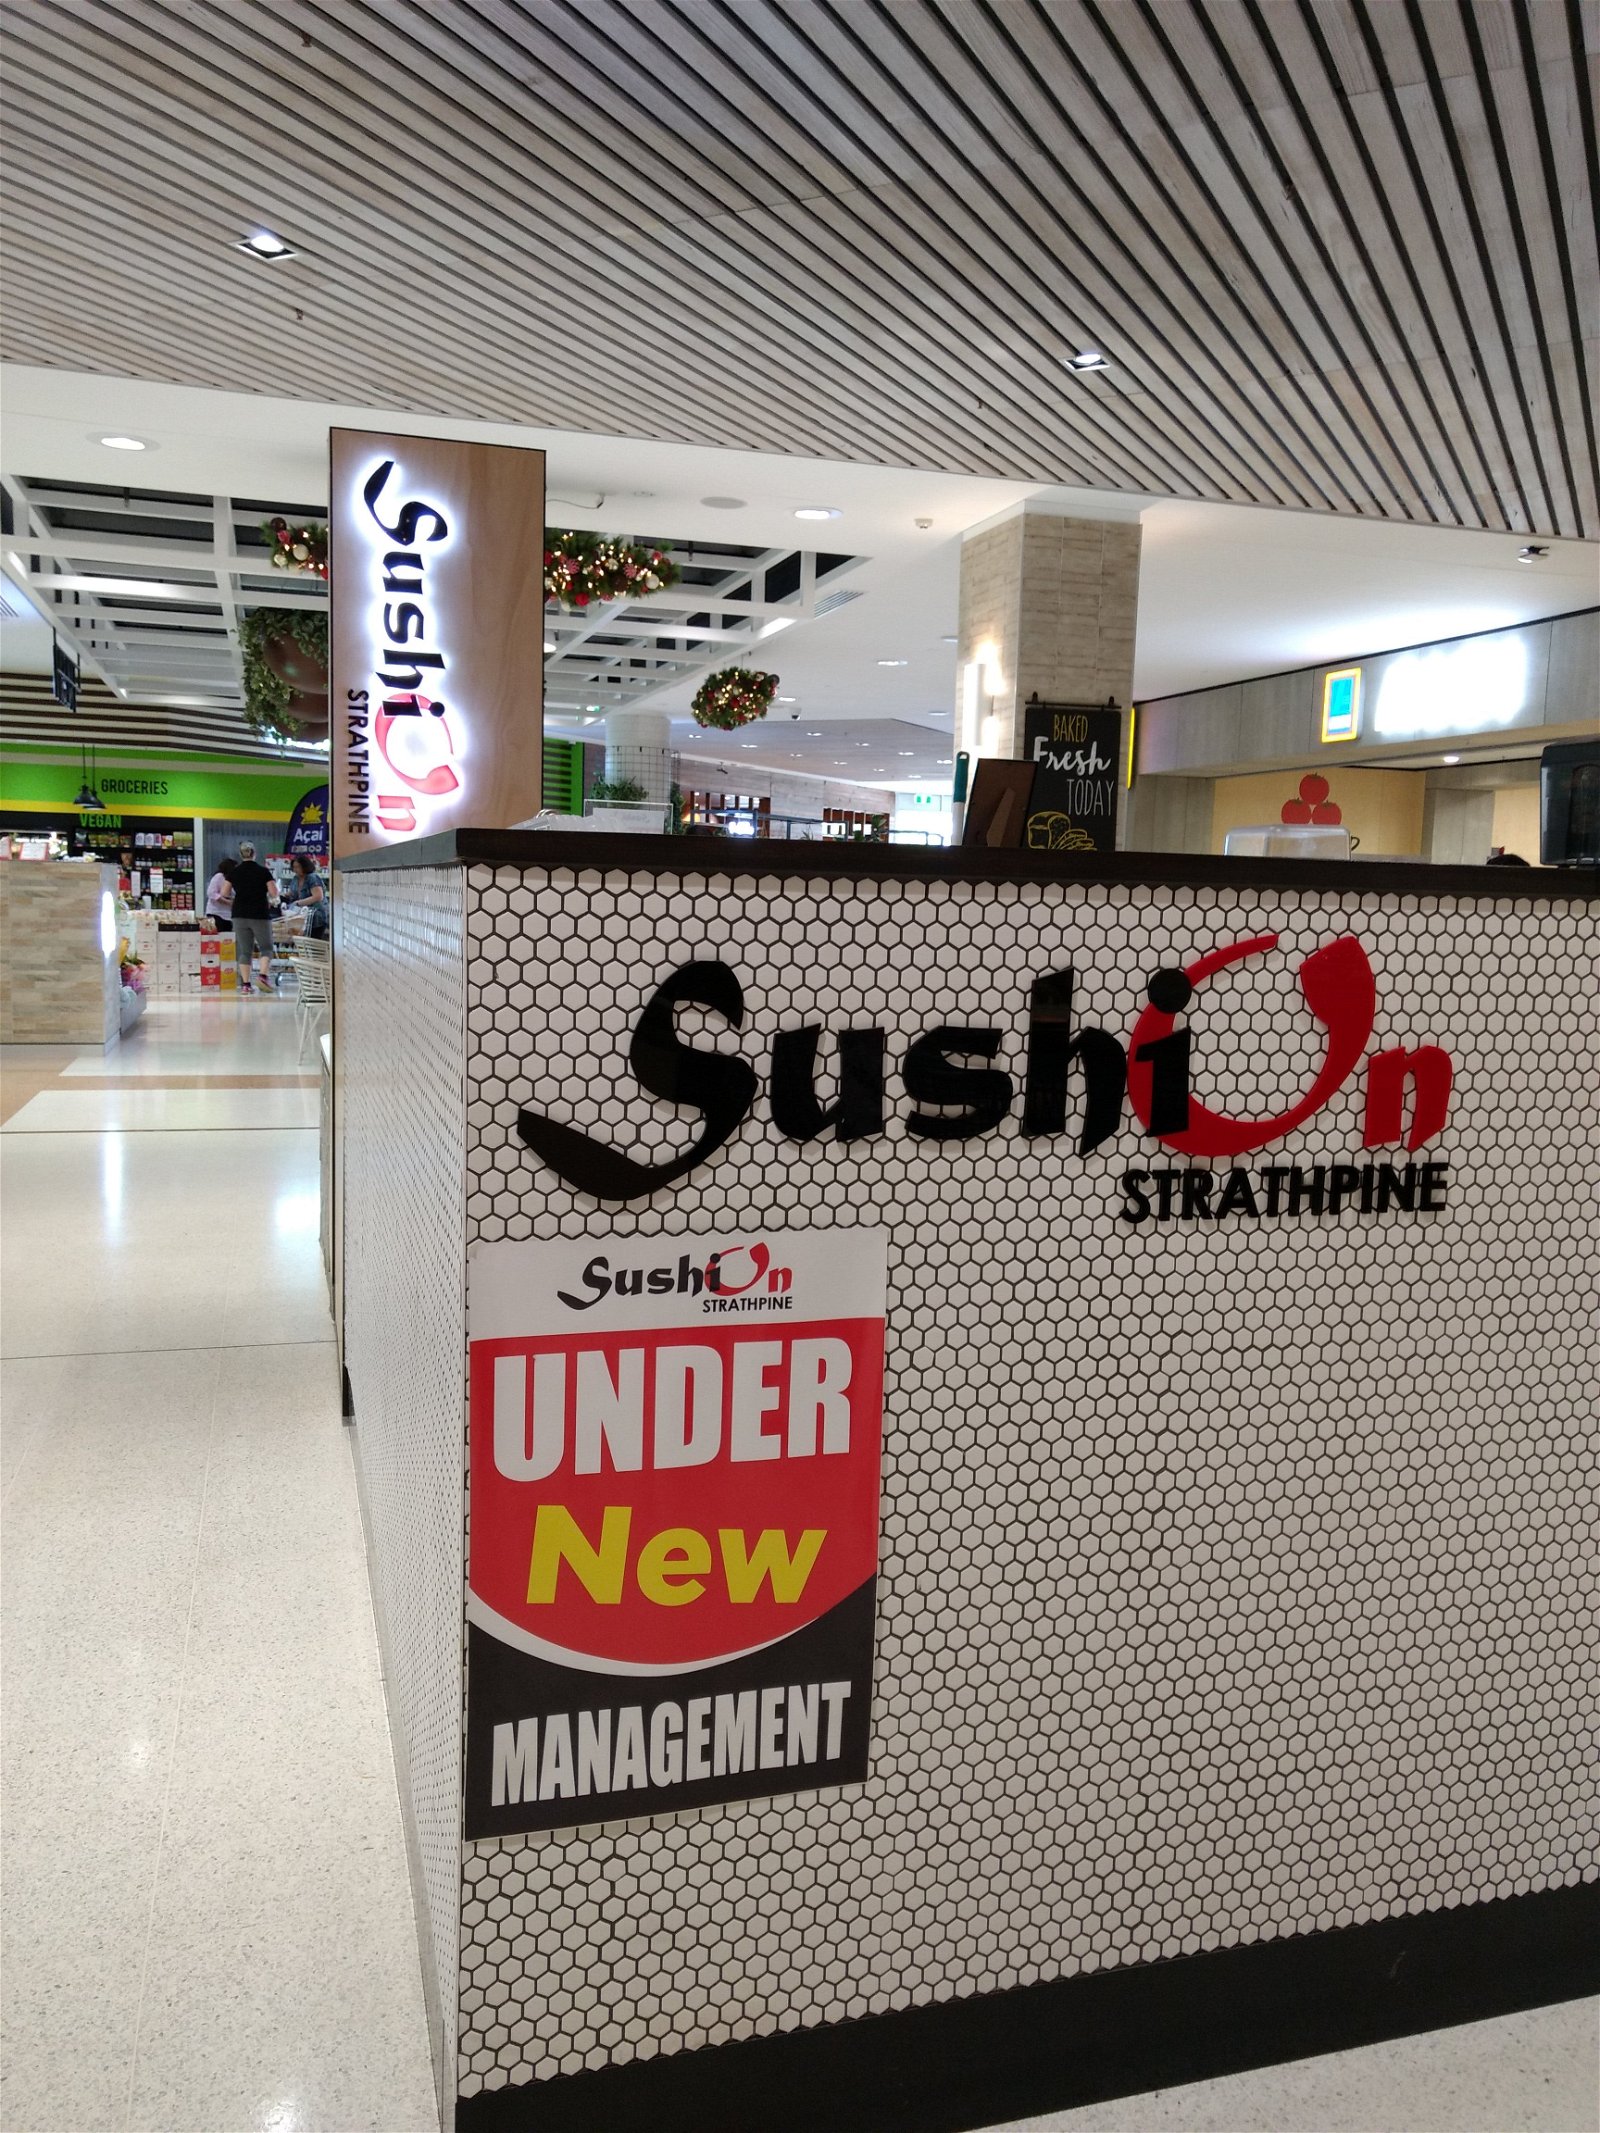 Sushi On Strathpine - 2032 Olympic Games